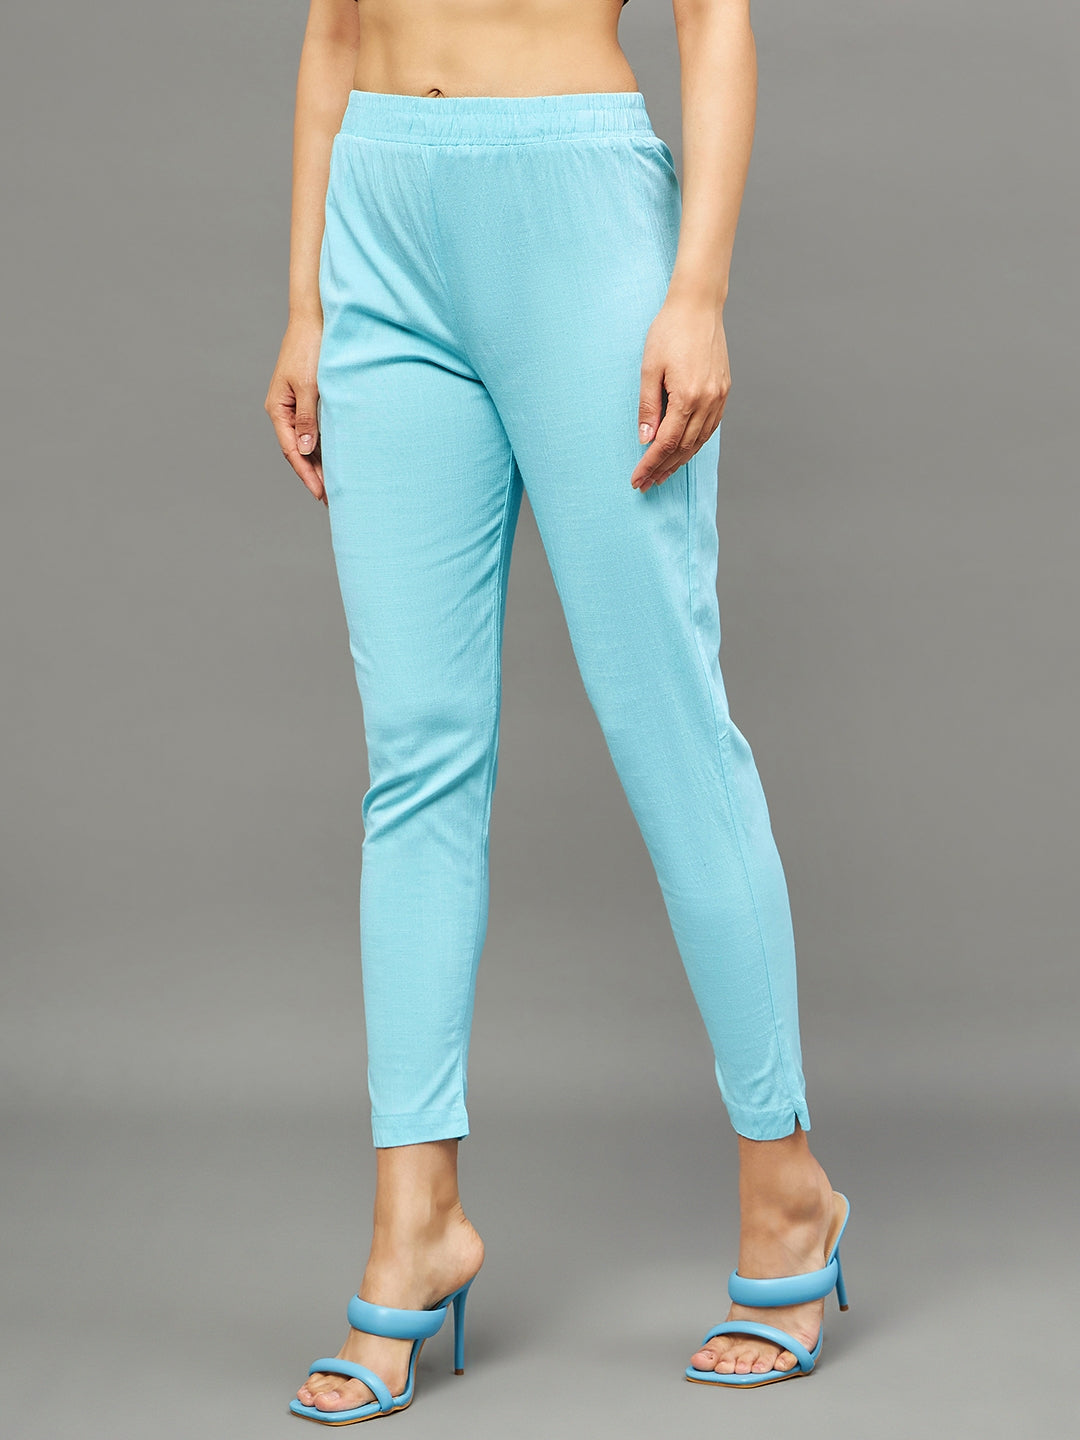 Classic Pants Office Trouser - Baby Blue - Wholesale Womens Clothing  Vendors For Boutiques